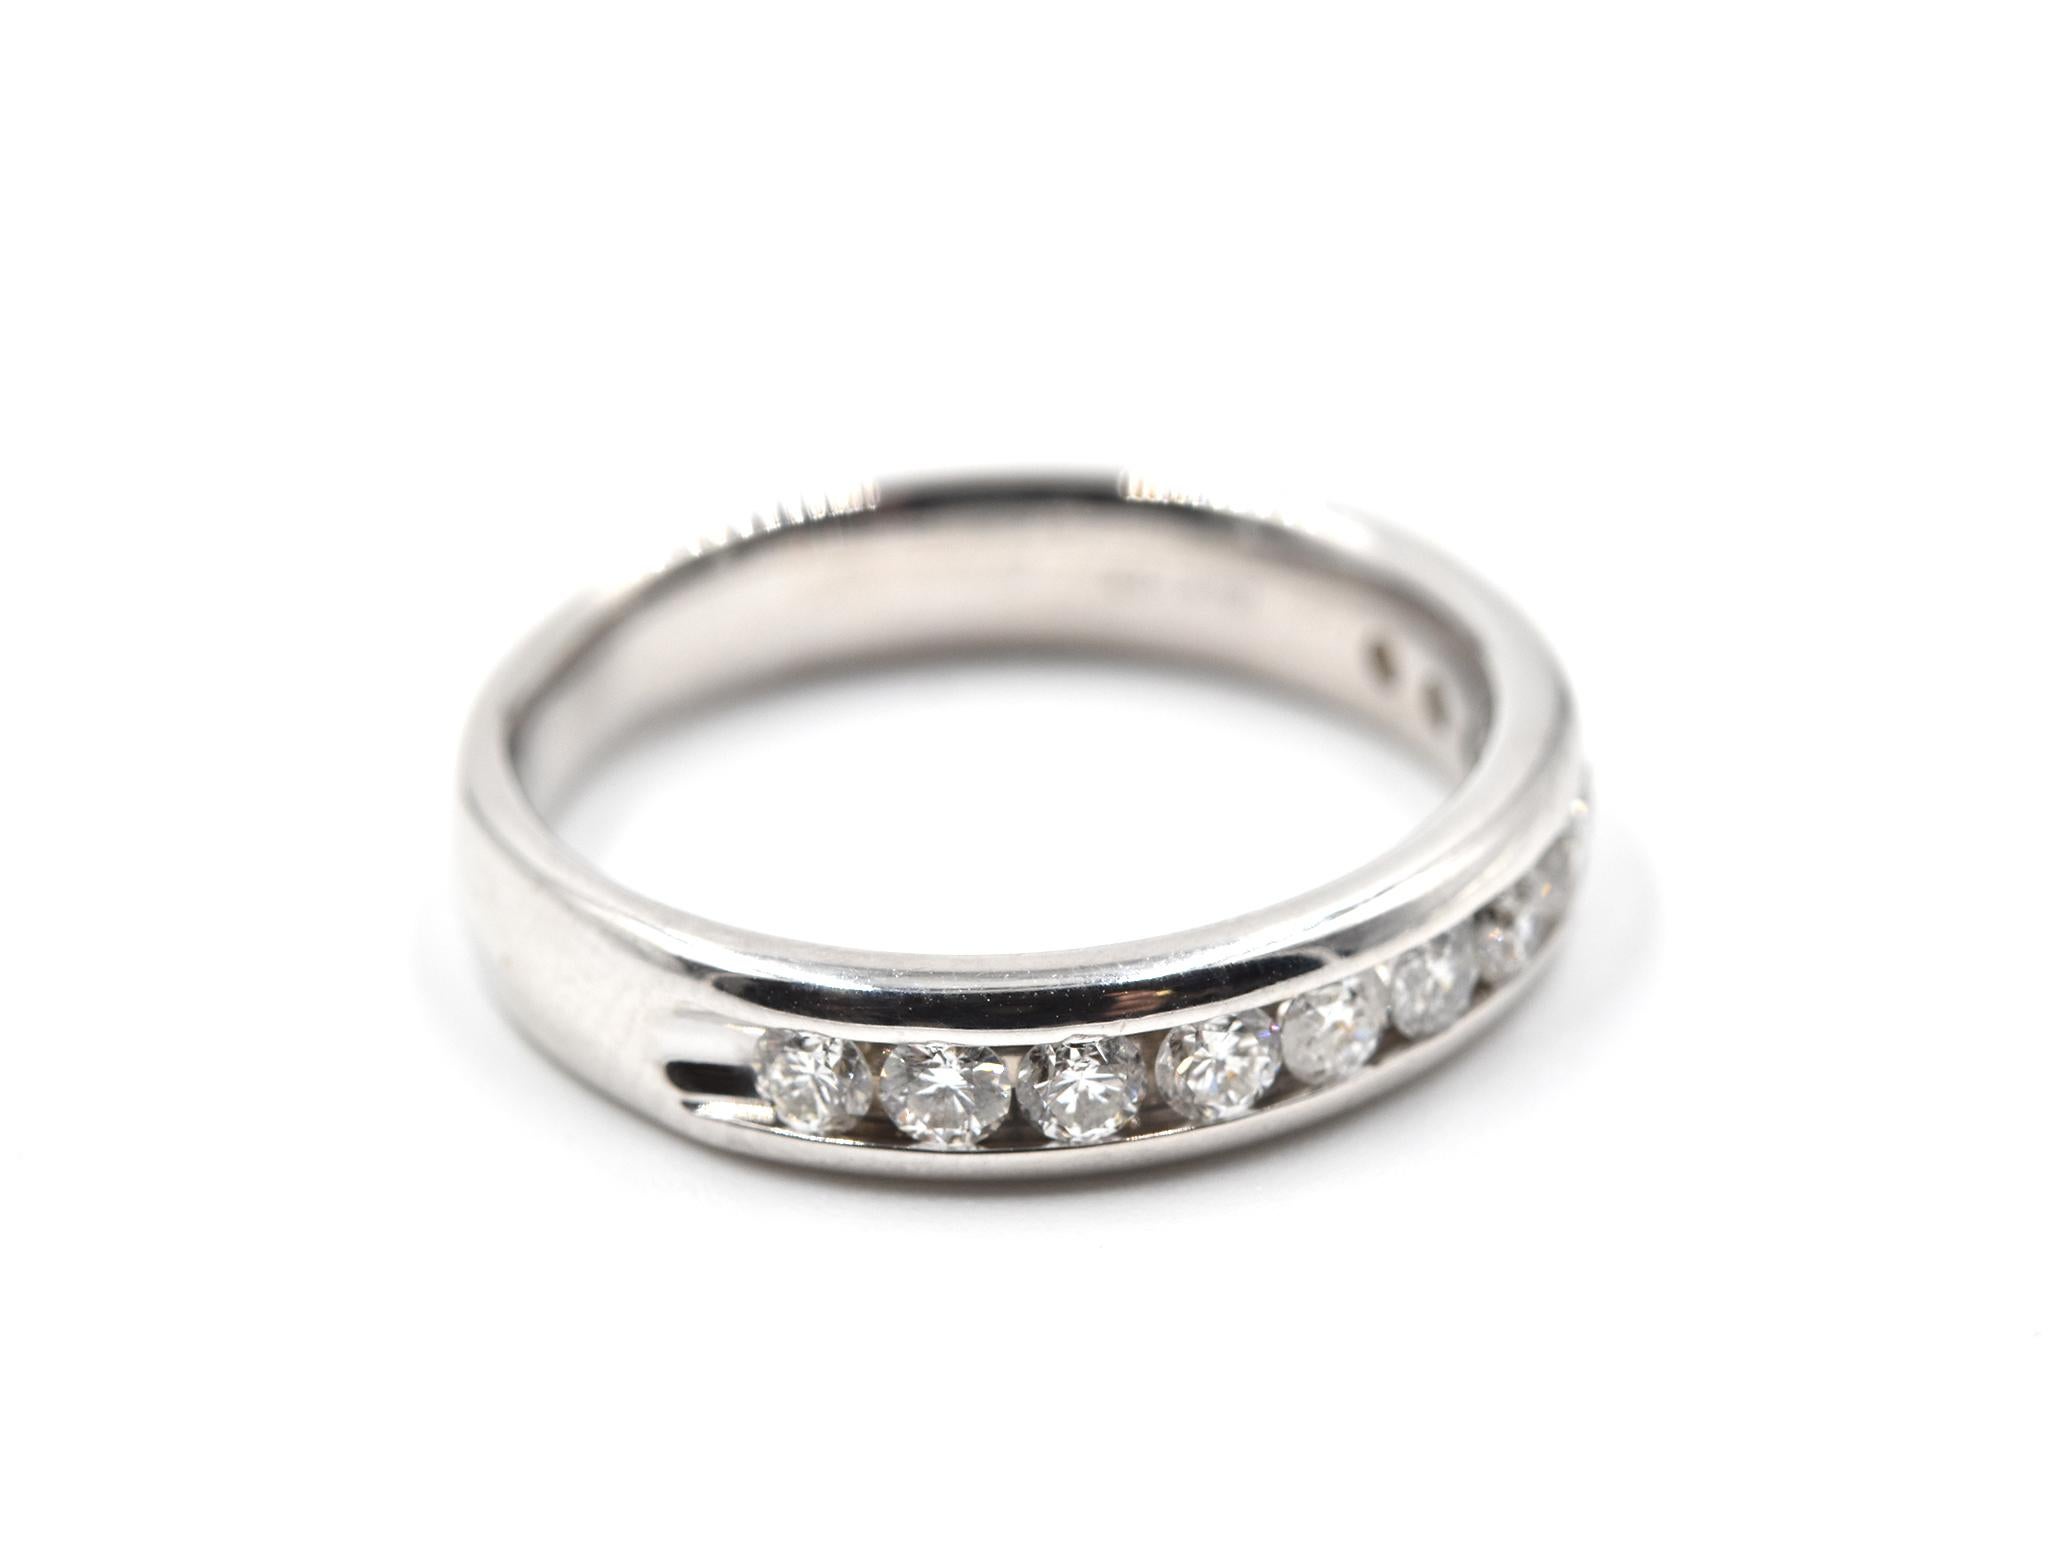 Designer: custom design
Material: 14k white gold
Diamonds: 12 round brilliant cut diamonds = 0.50 carat total weight
Color: H
Clarity: SI1
Dimensions: band is 4.00mm wide
Ring size: 5 3/4 (please allow two additional shipping days for sizing